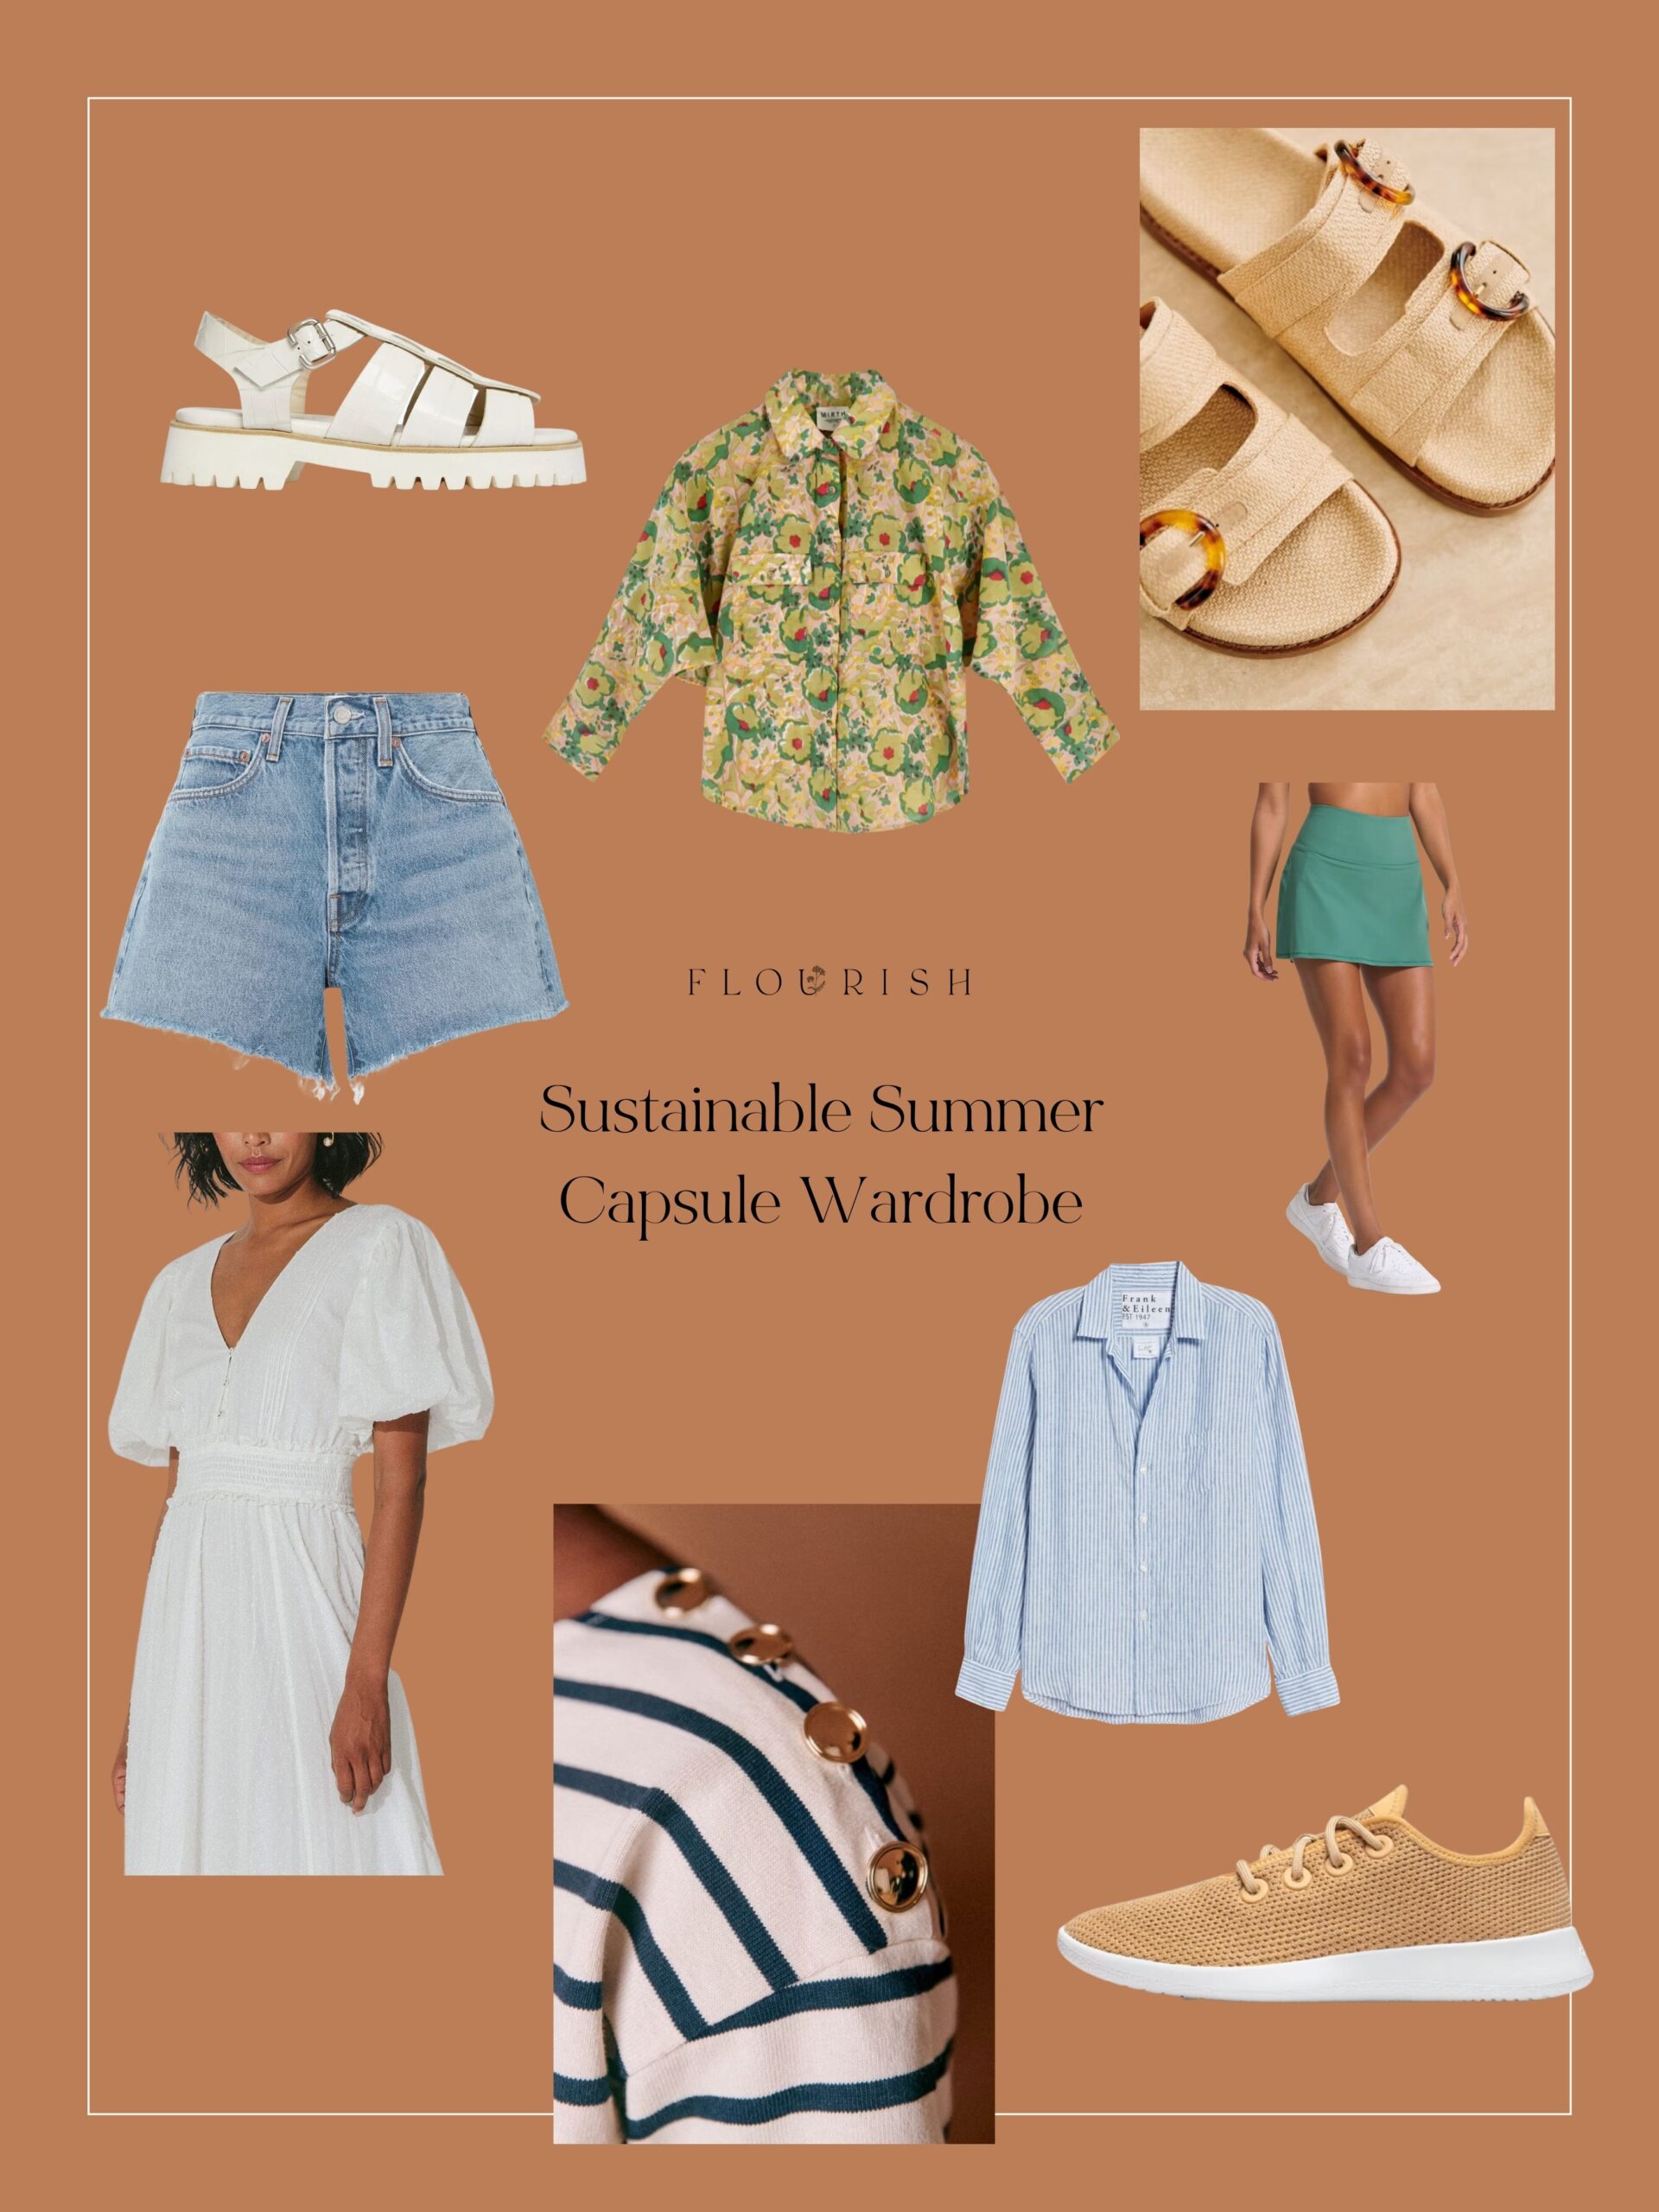 How to Build a Classic Summer Capsule Wardrobe